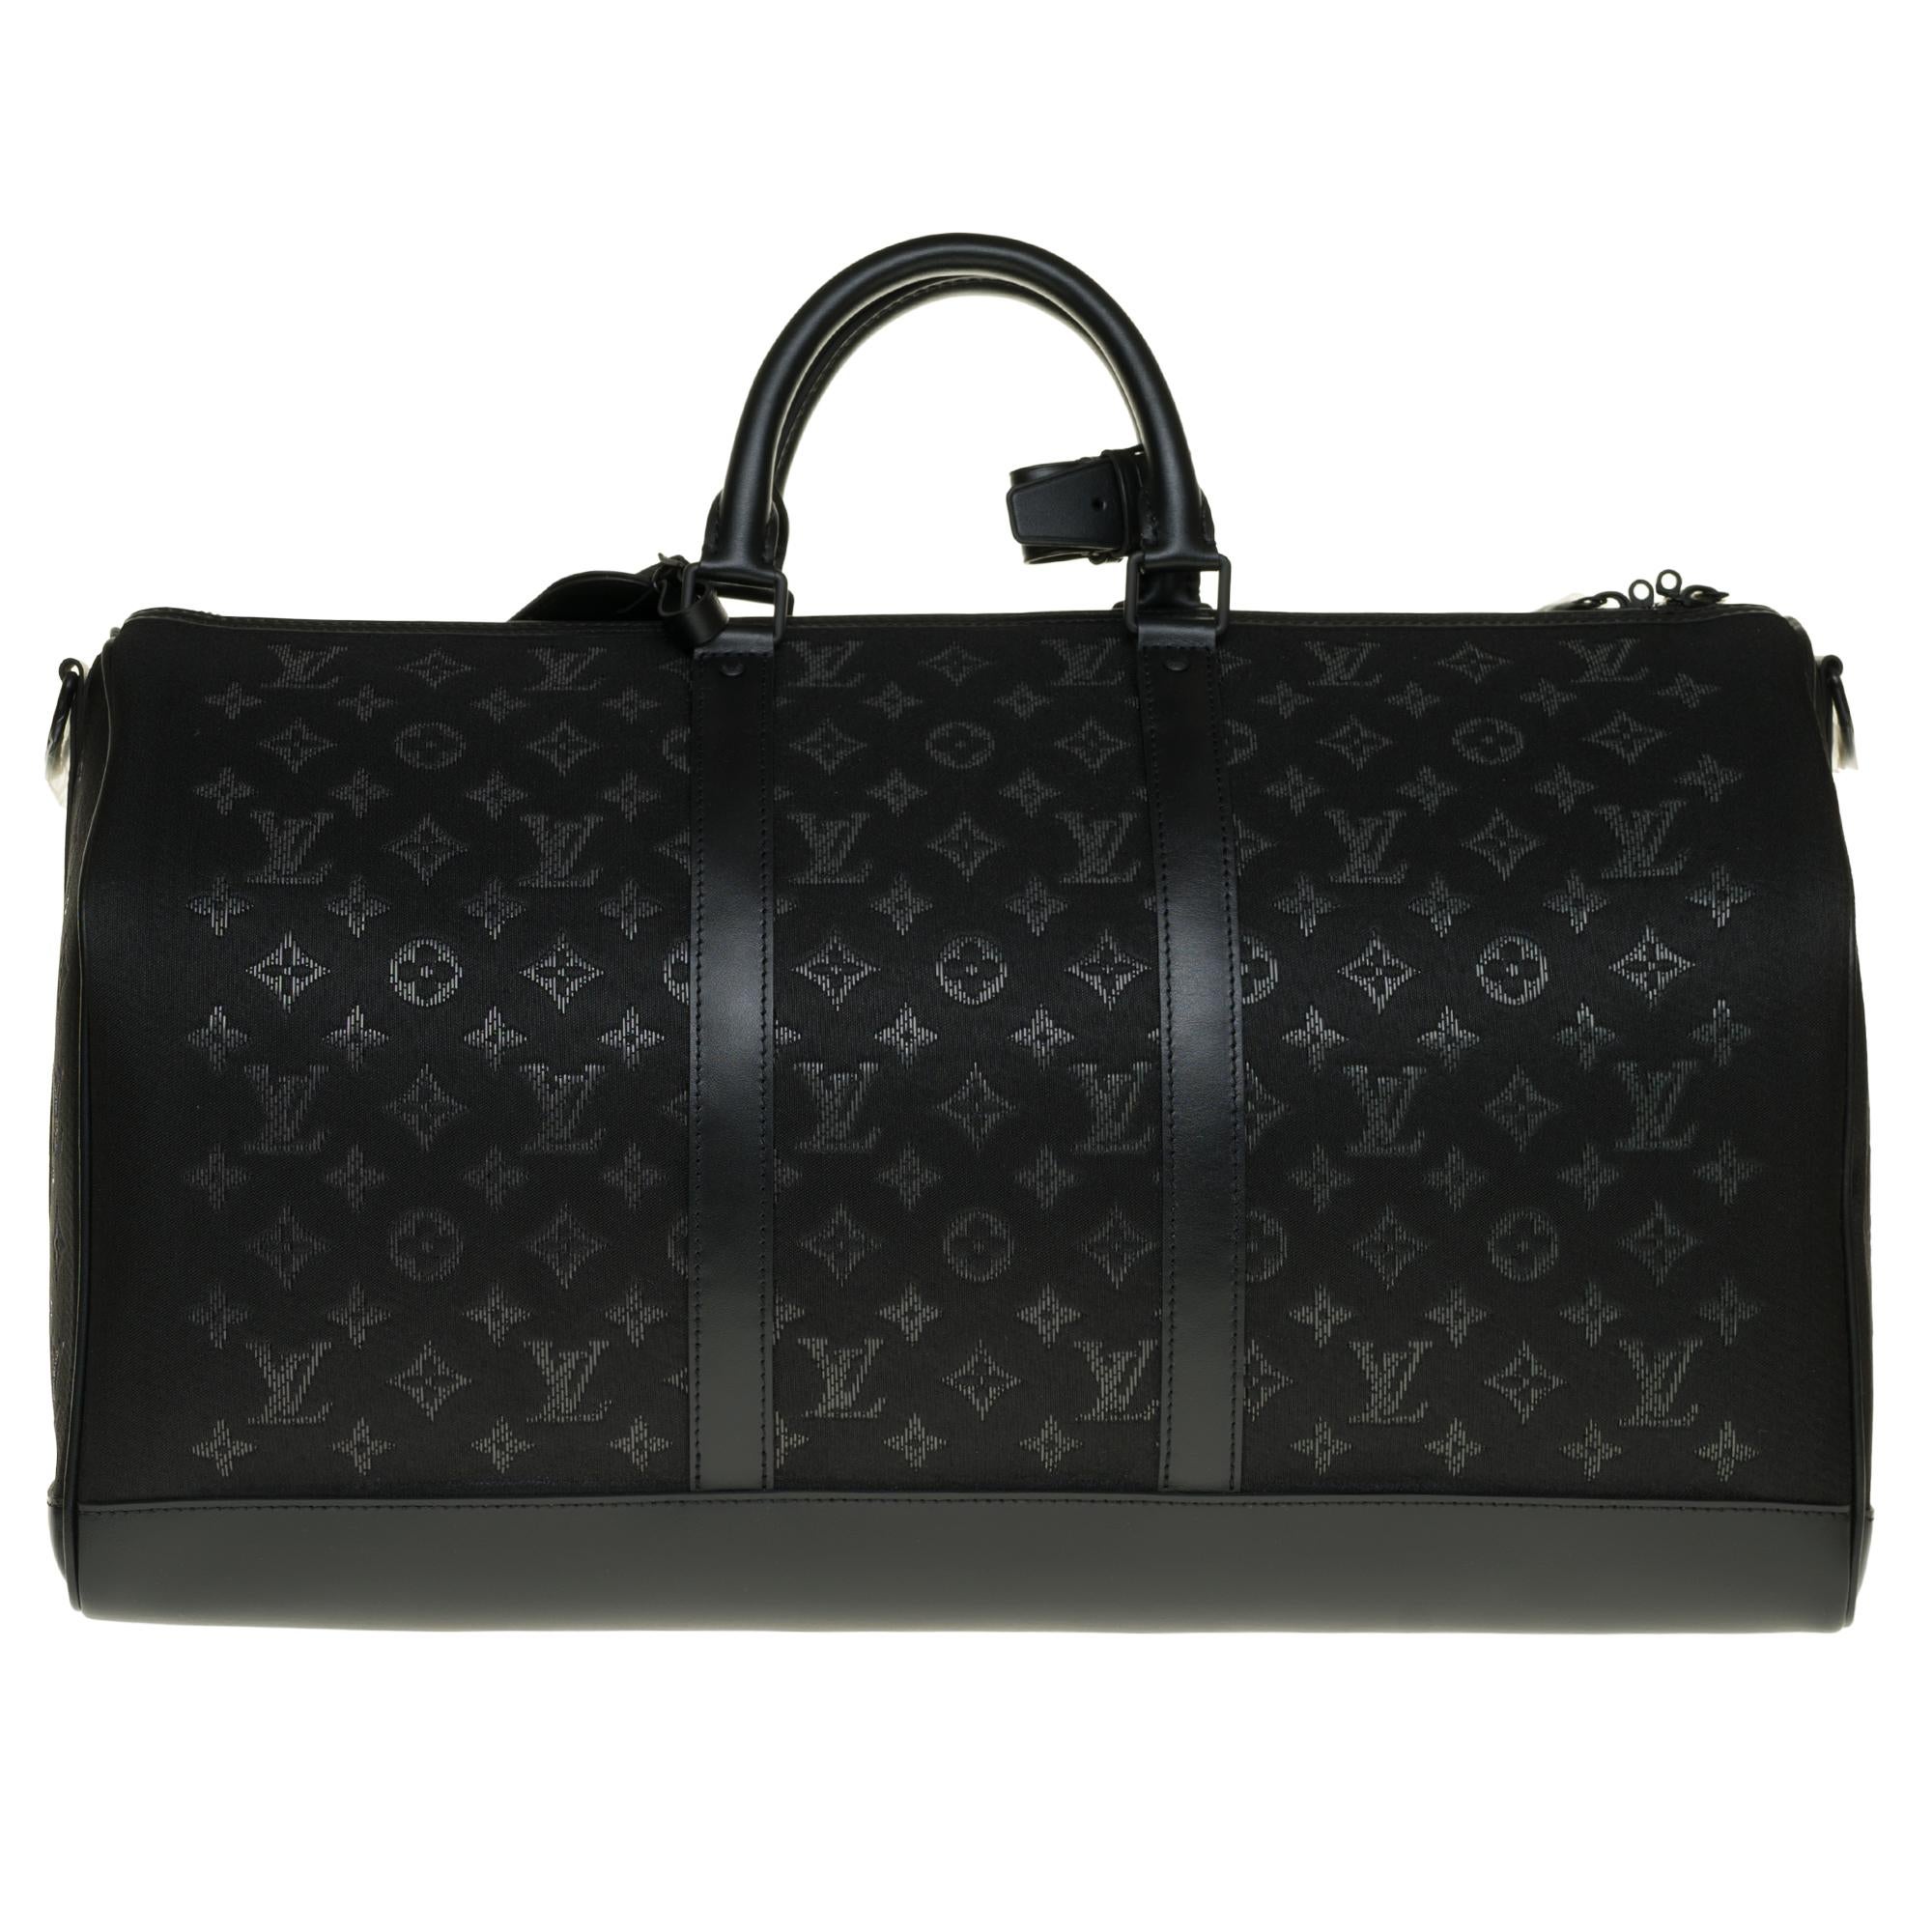 Black BRAND NEW-Limited edition Louis Vuitton keepall 50 Light Up virgil abloh fw19